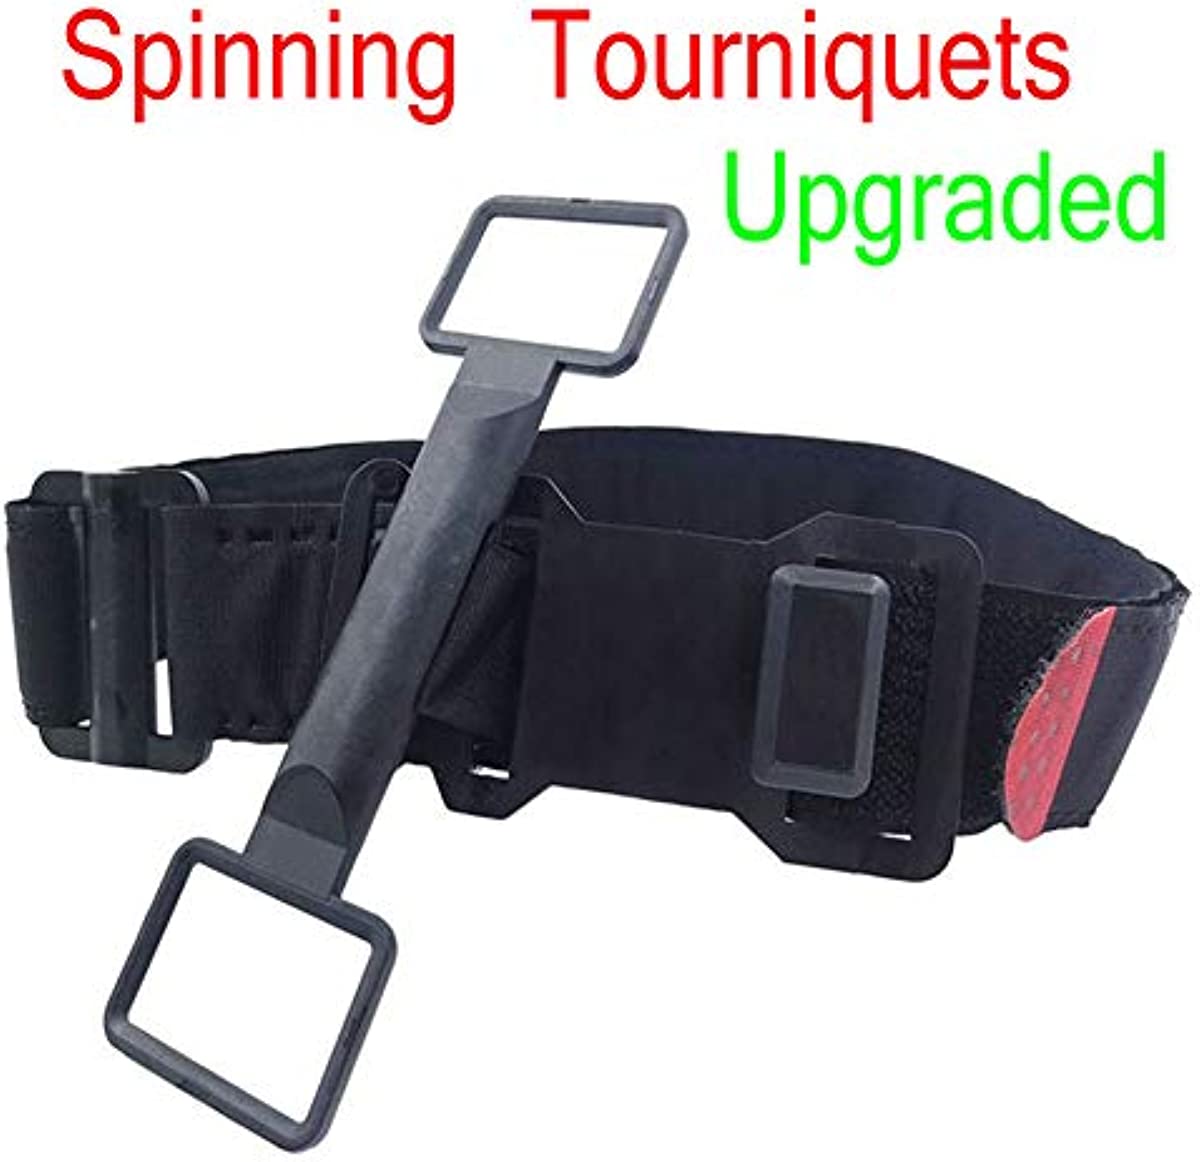 Jwxstore Tourniquets, 2-Pack Outdoor Portable Tourniquet One Hand First Aid Quick Slow Release Buckle Medical Military Tactical Emergency Tourniquet